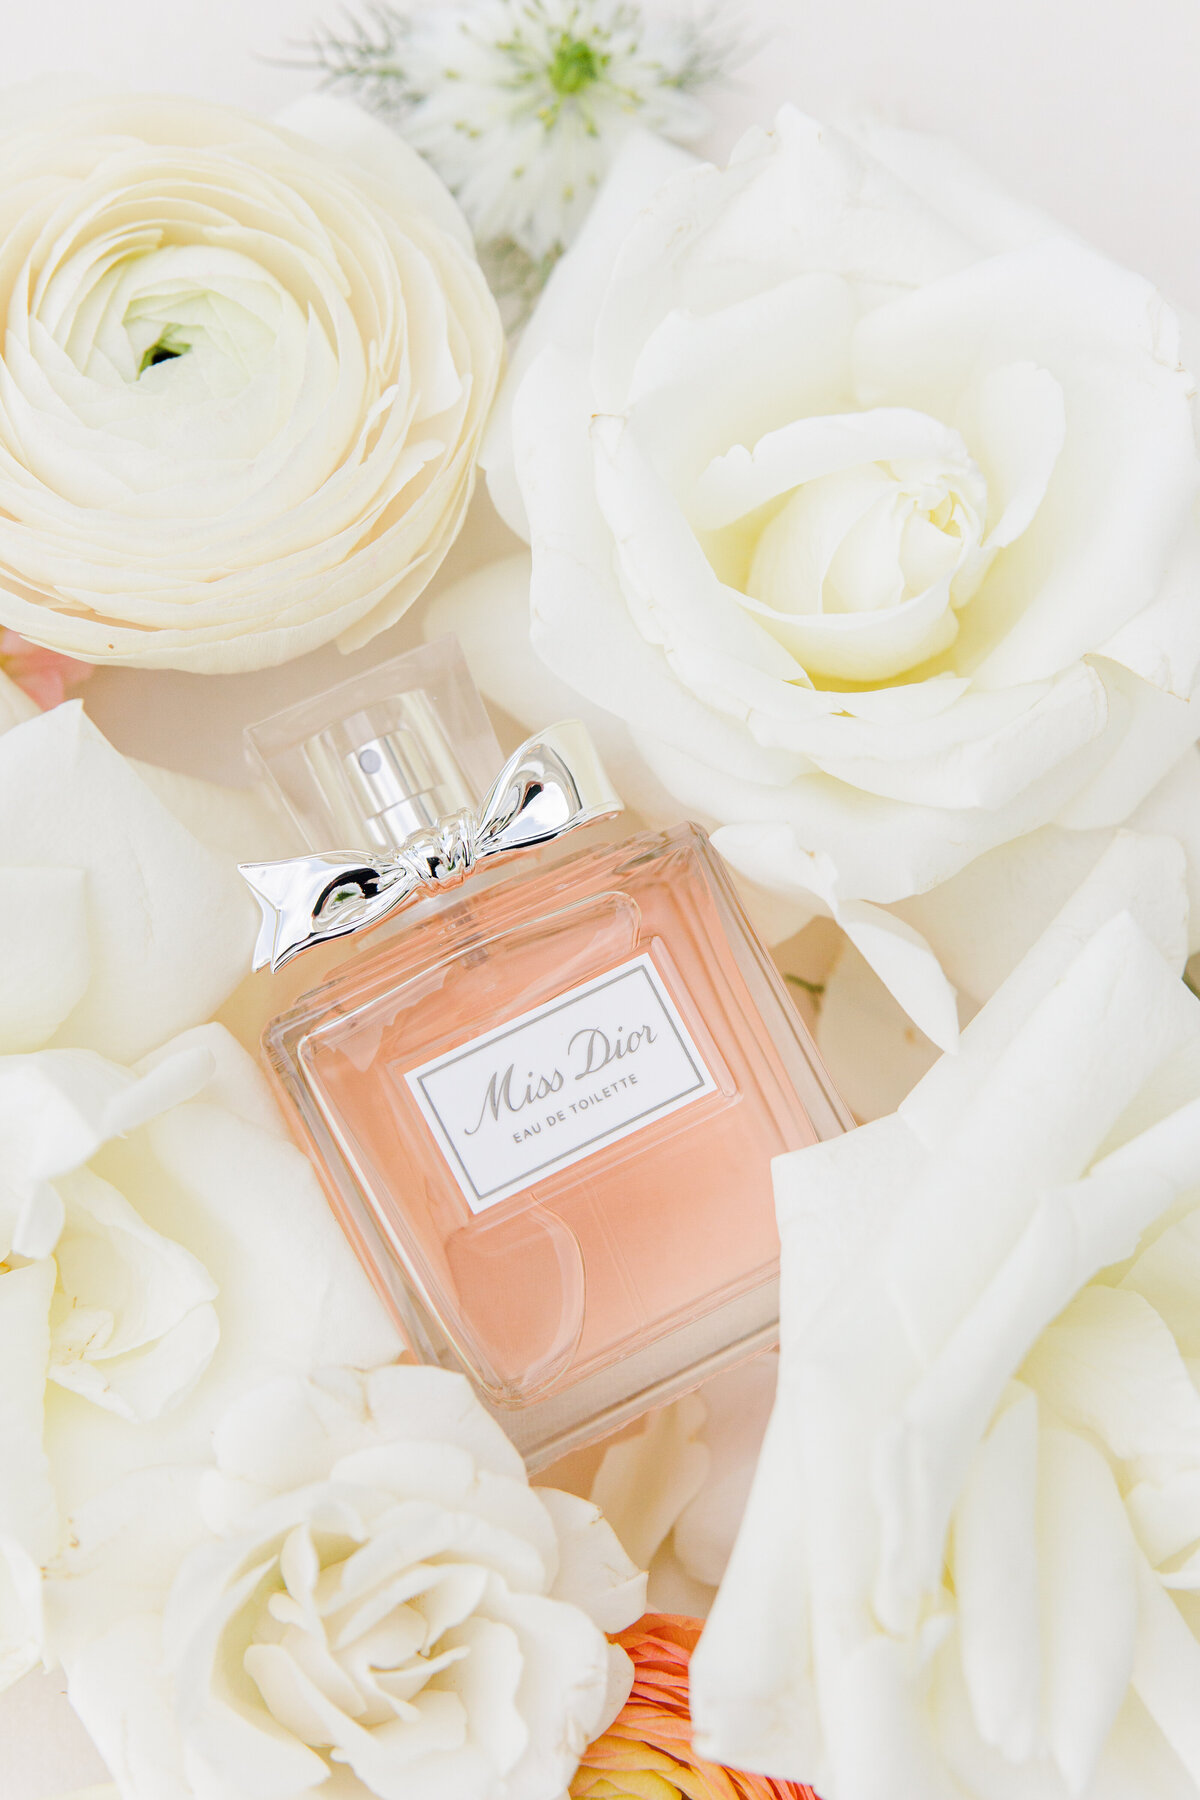 Pefume surrounded by white florals representing Christine Hazel Photography's attention to detail